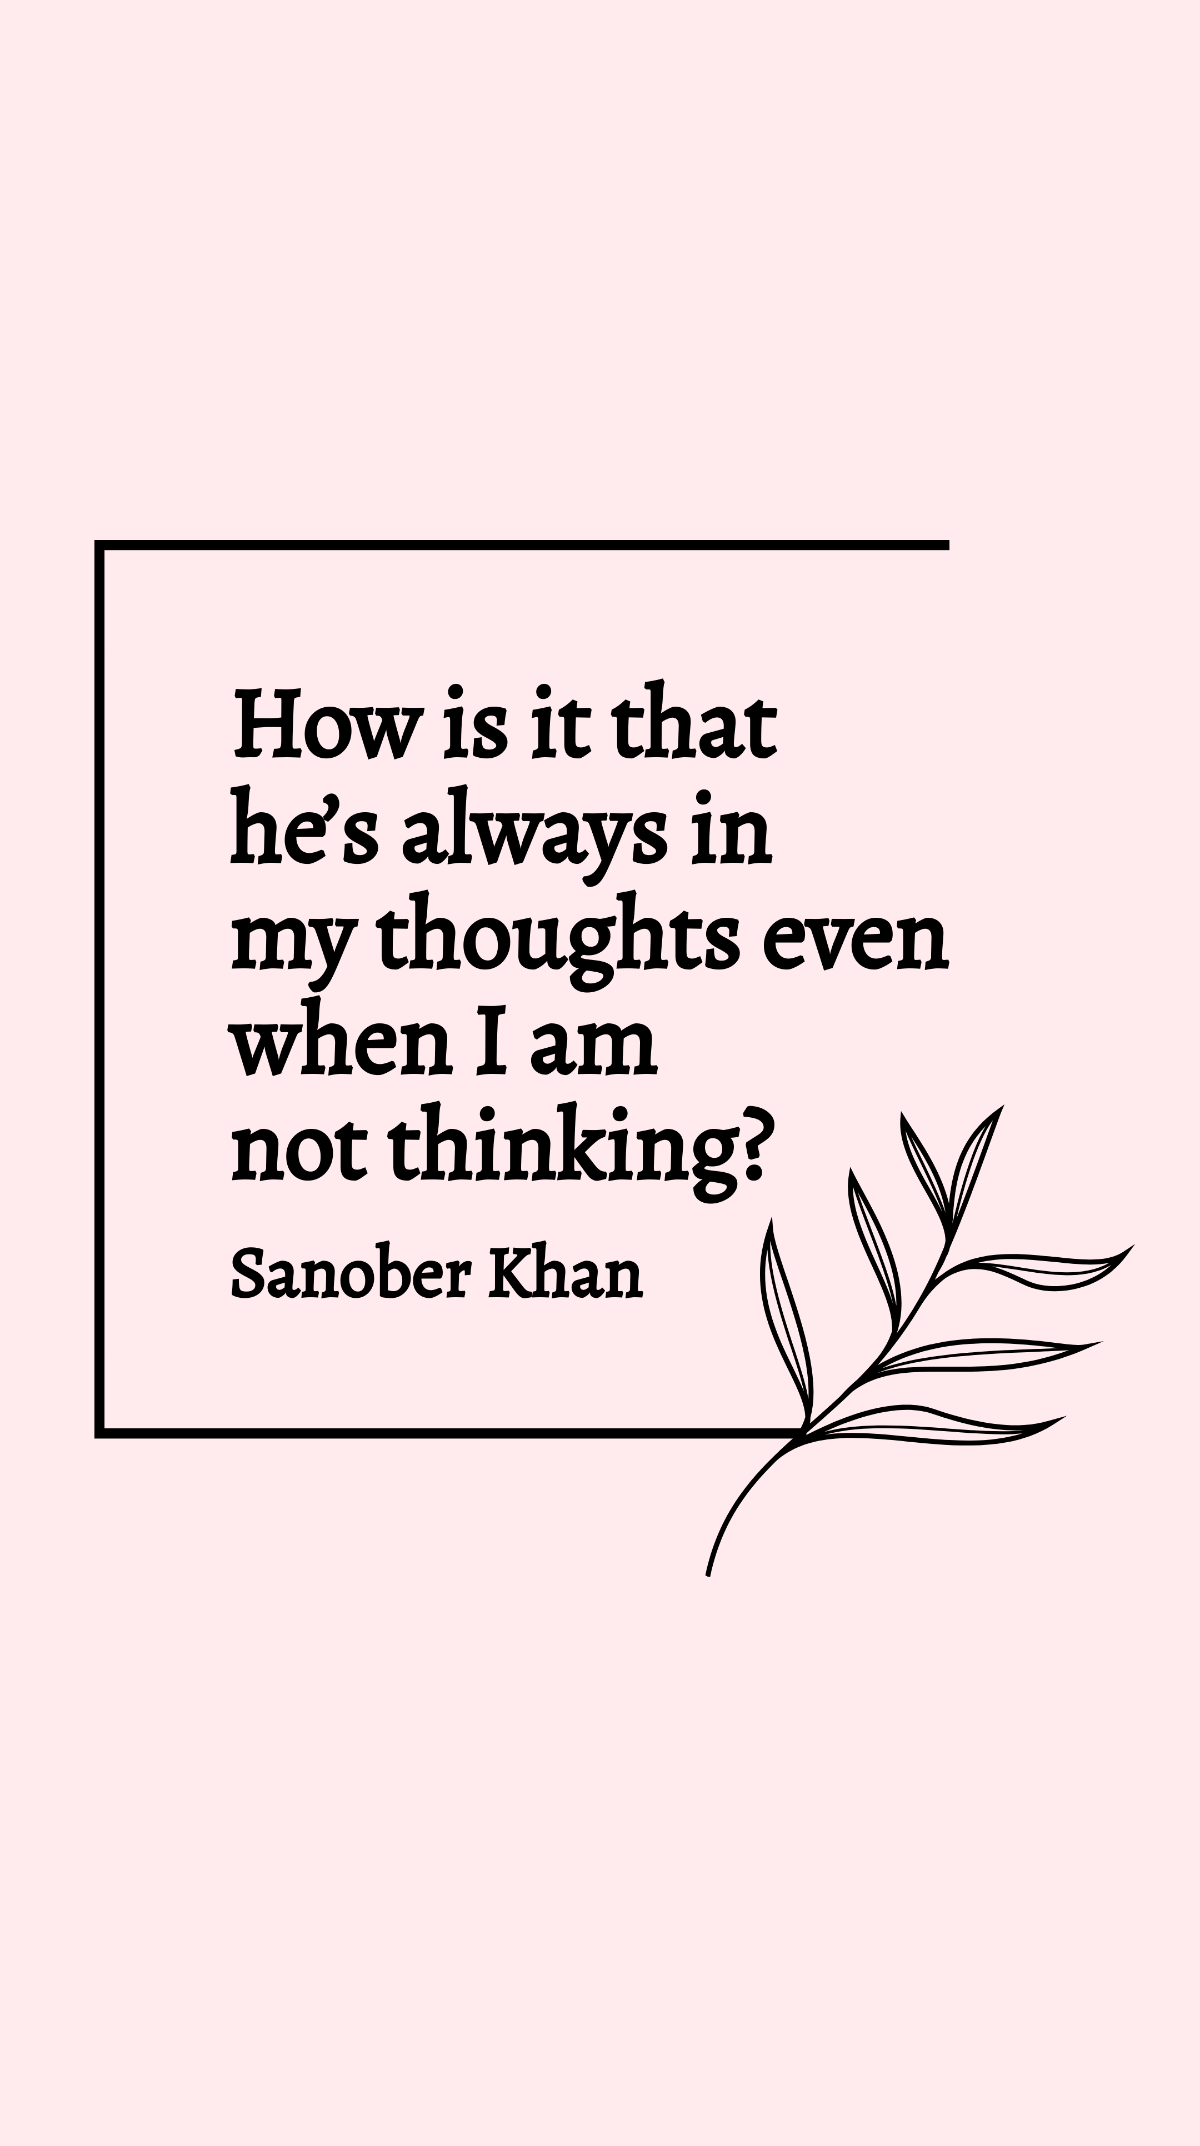 Sanober Khan - How is it that he’s always in my thoughts even when I am not thinking?